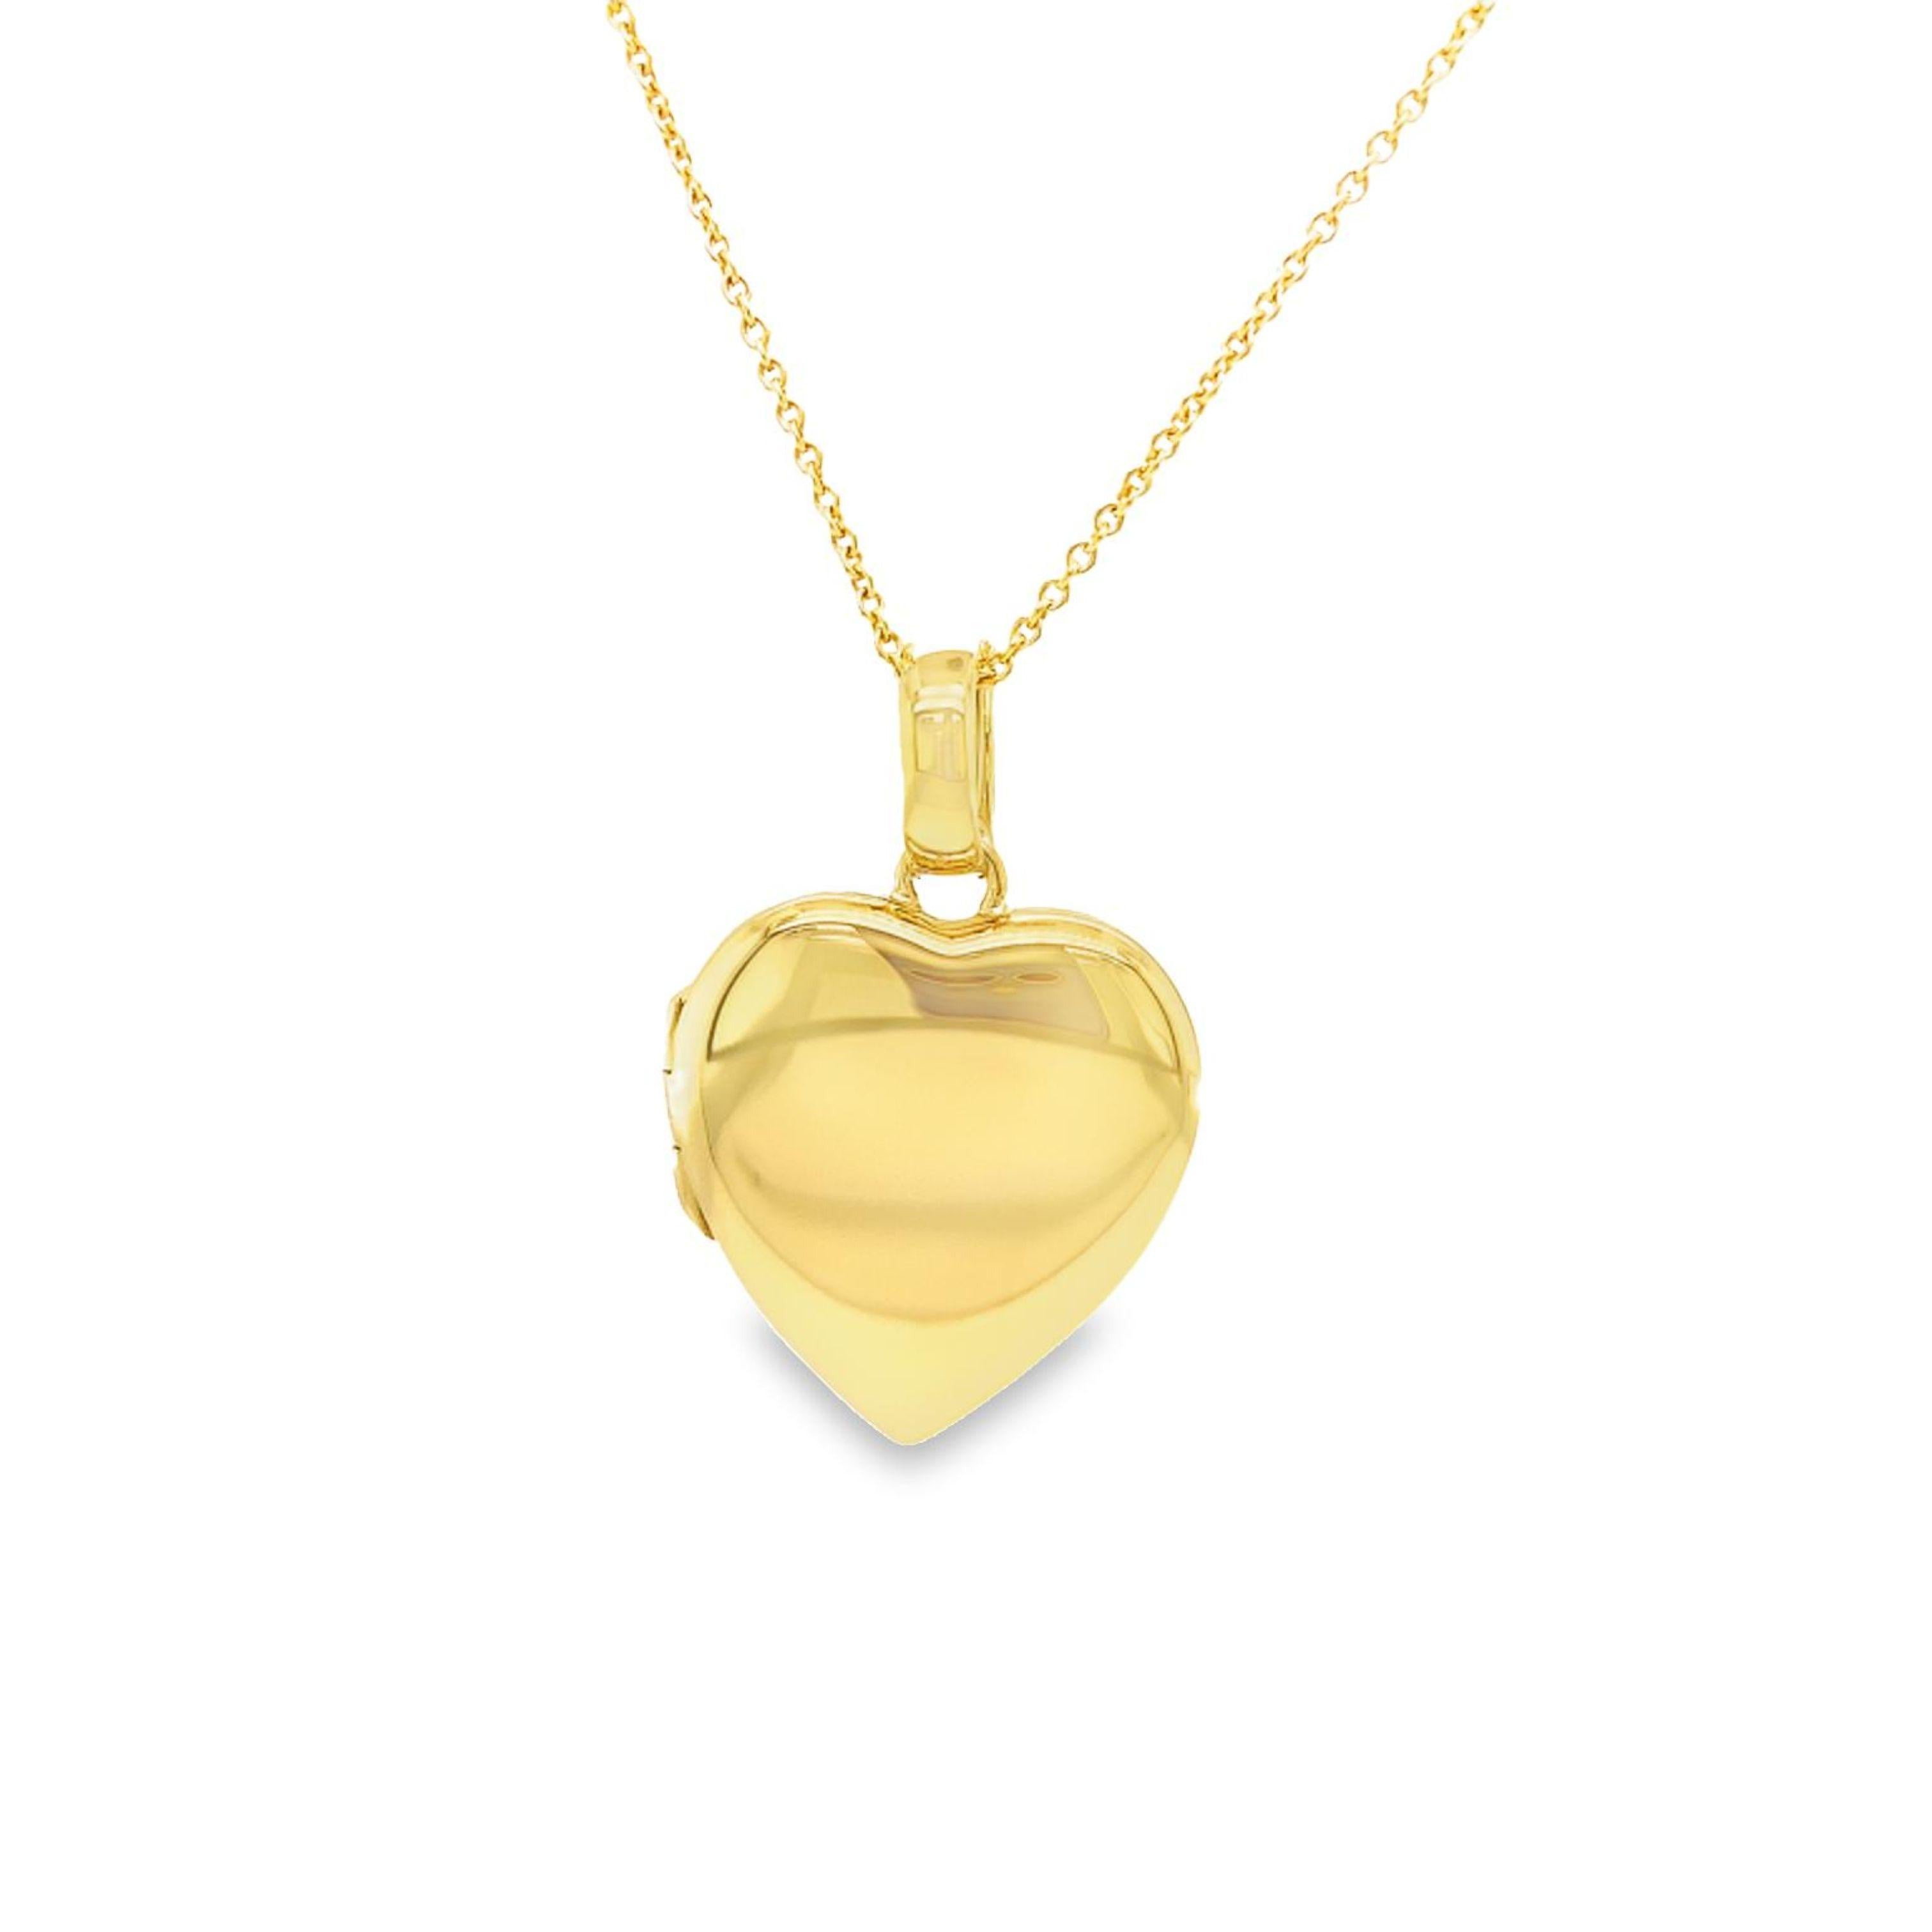 Heart shaped locket pendant necklace, Hallmark Collection by Victor Mayer, 18k yellow gold, measurements app. 23.0 mm x 25.0 mm

About the creator Victor Mayer
Victor Mayer is internationally renowned for elegant timeless designs and unrivalled